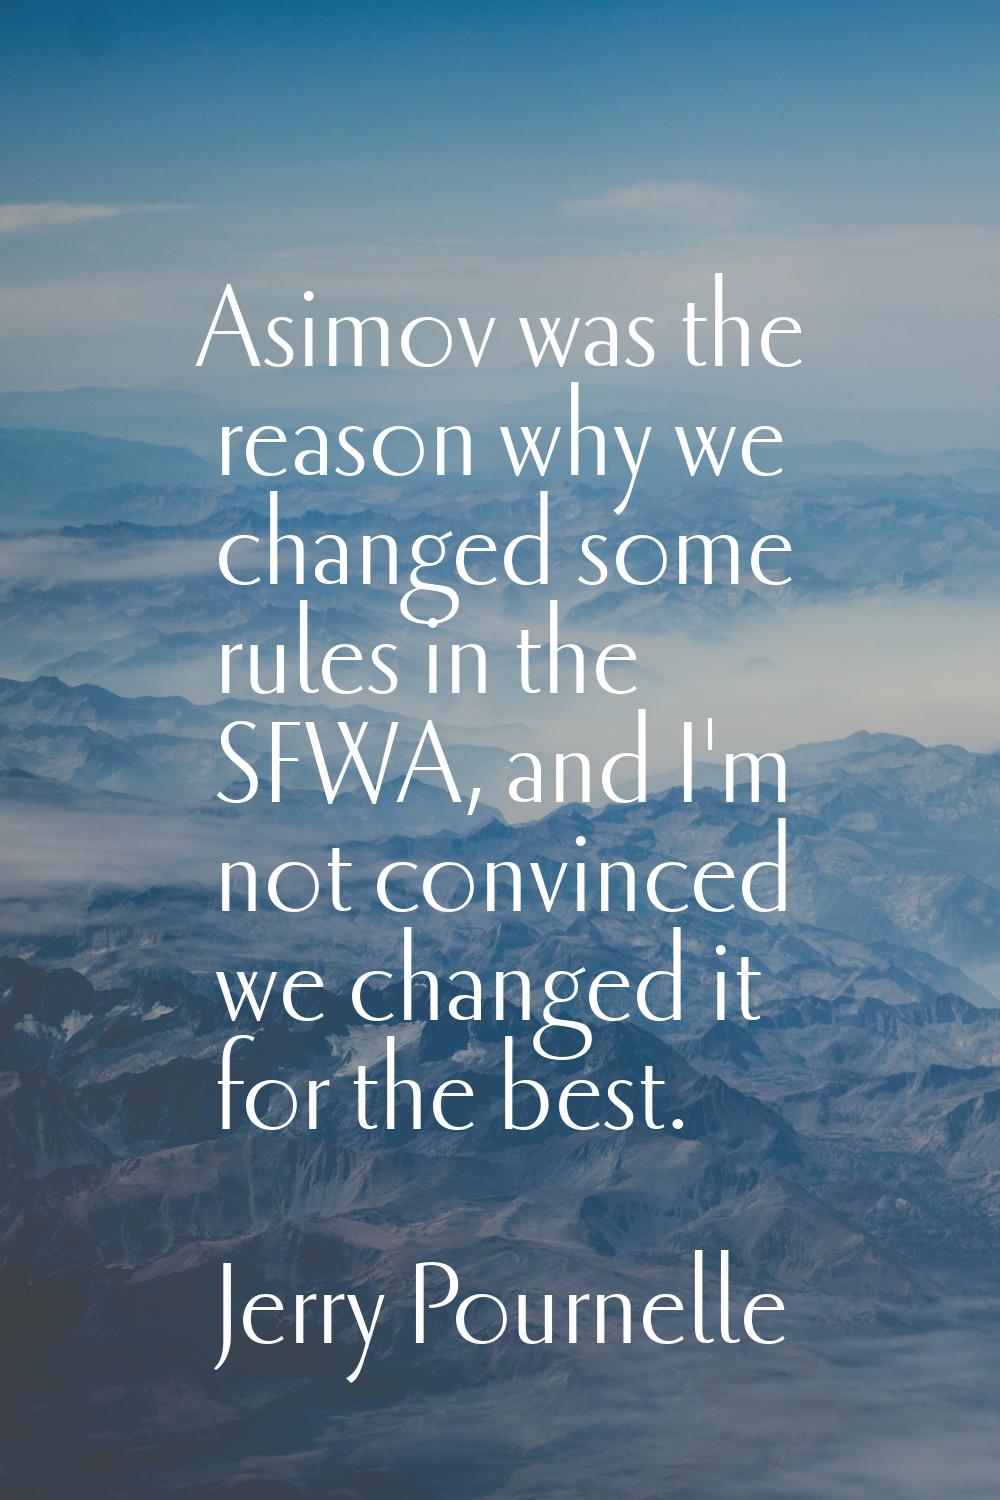 Asimov was the reason why we changed some rules in the SFWA, and I'm not convinced we changed it fo